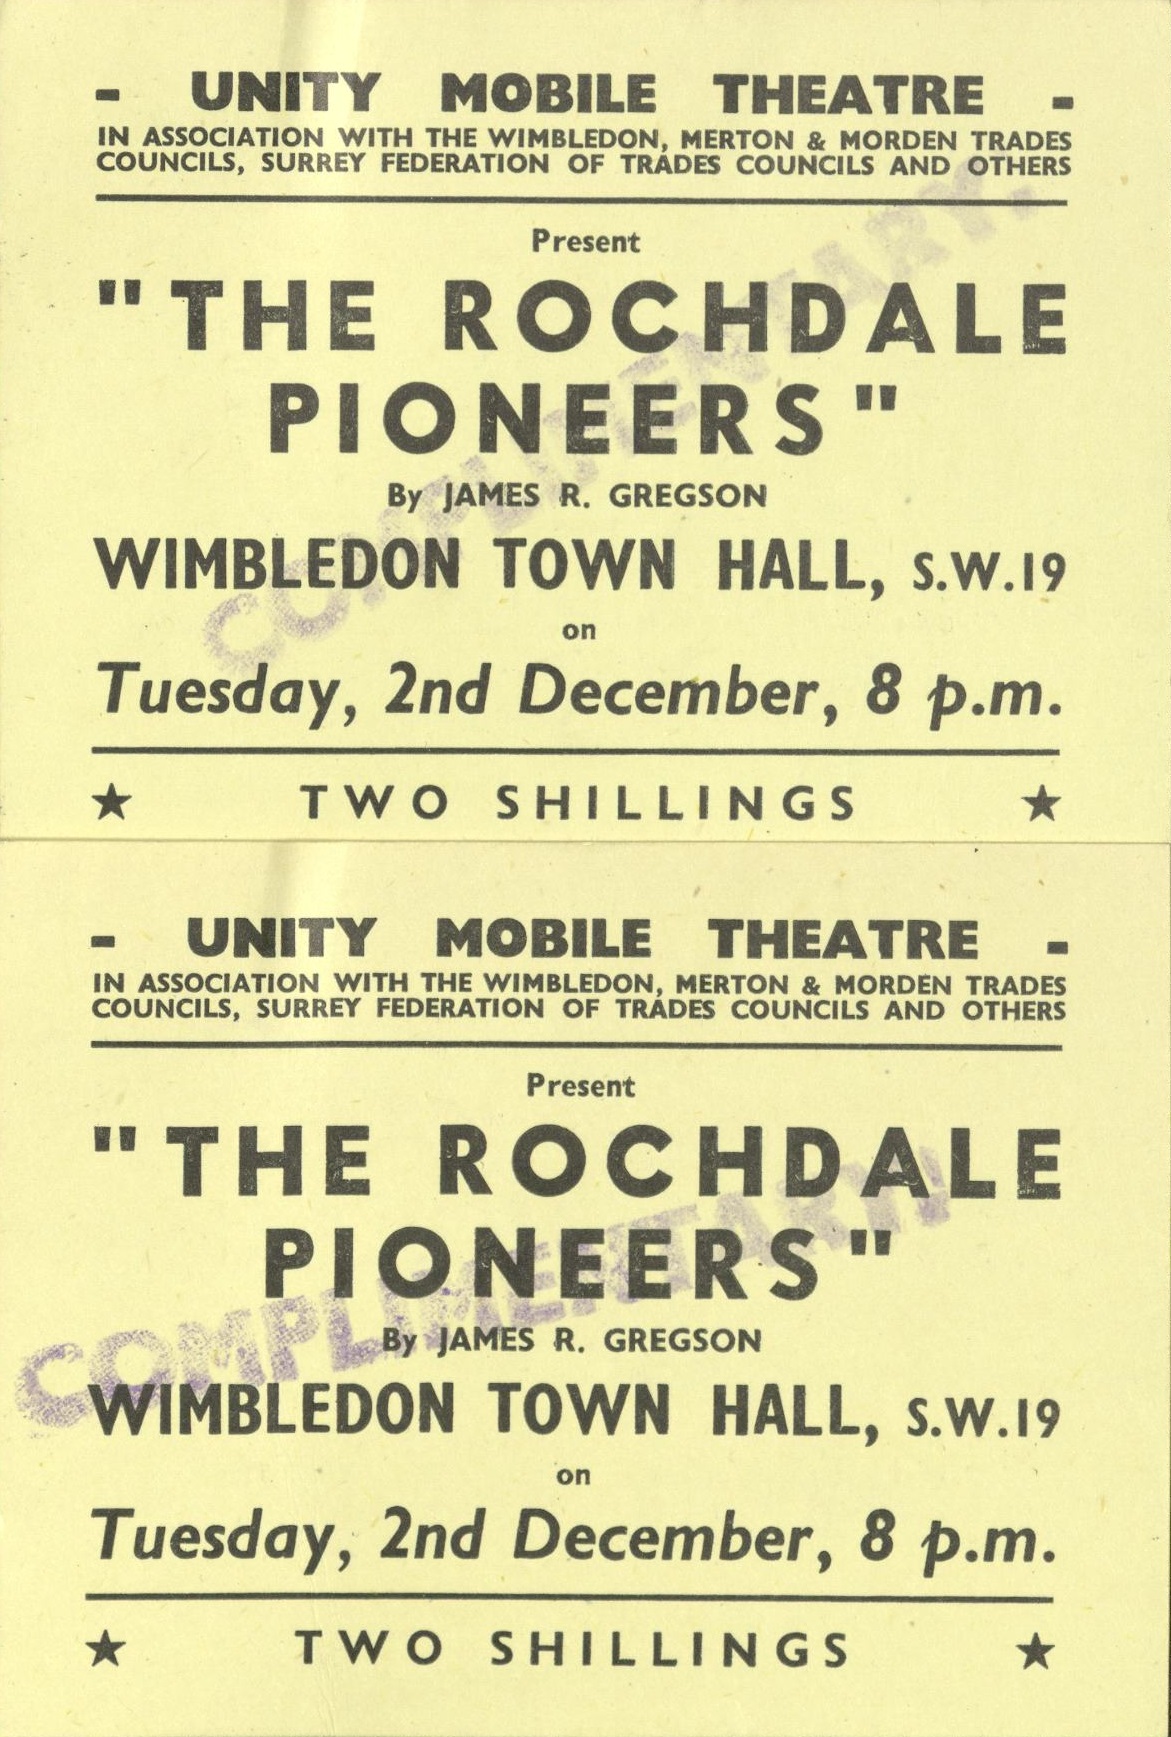 Leaflet for the Rochdale Pioneers